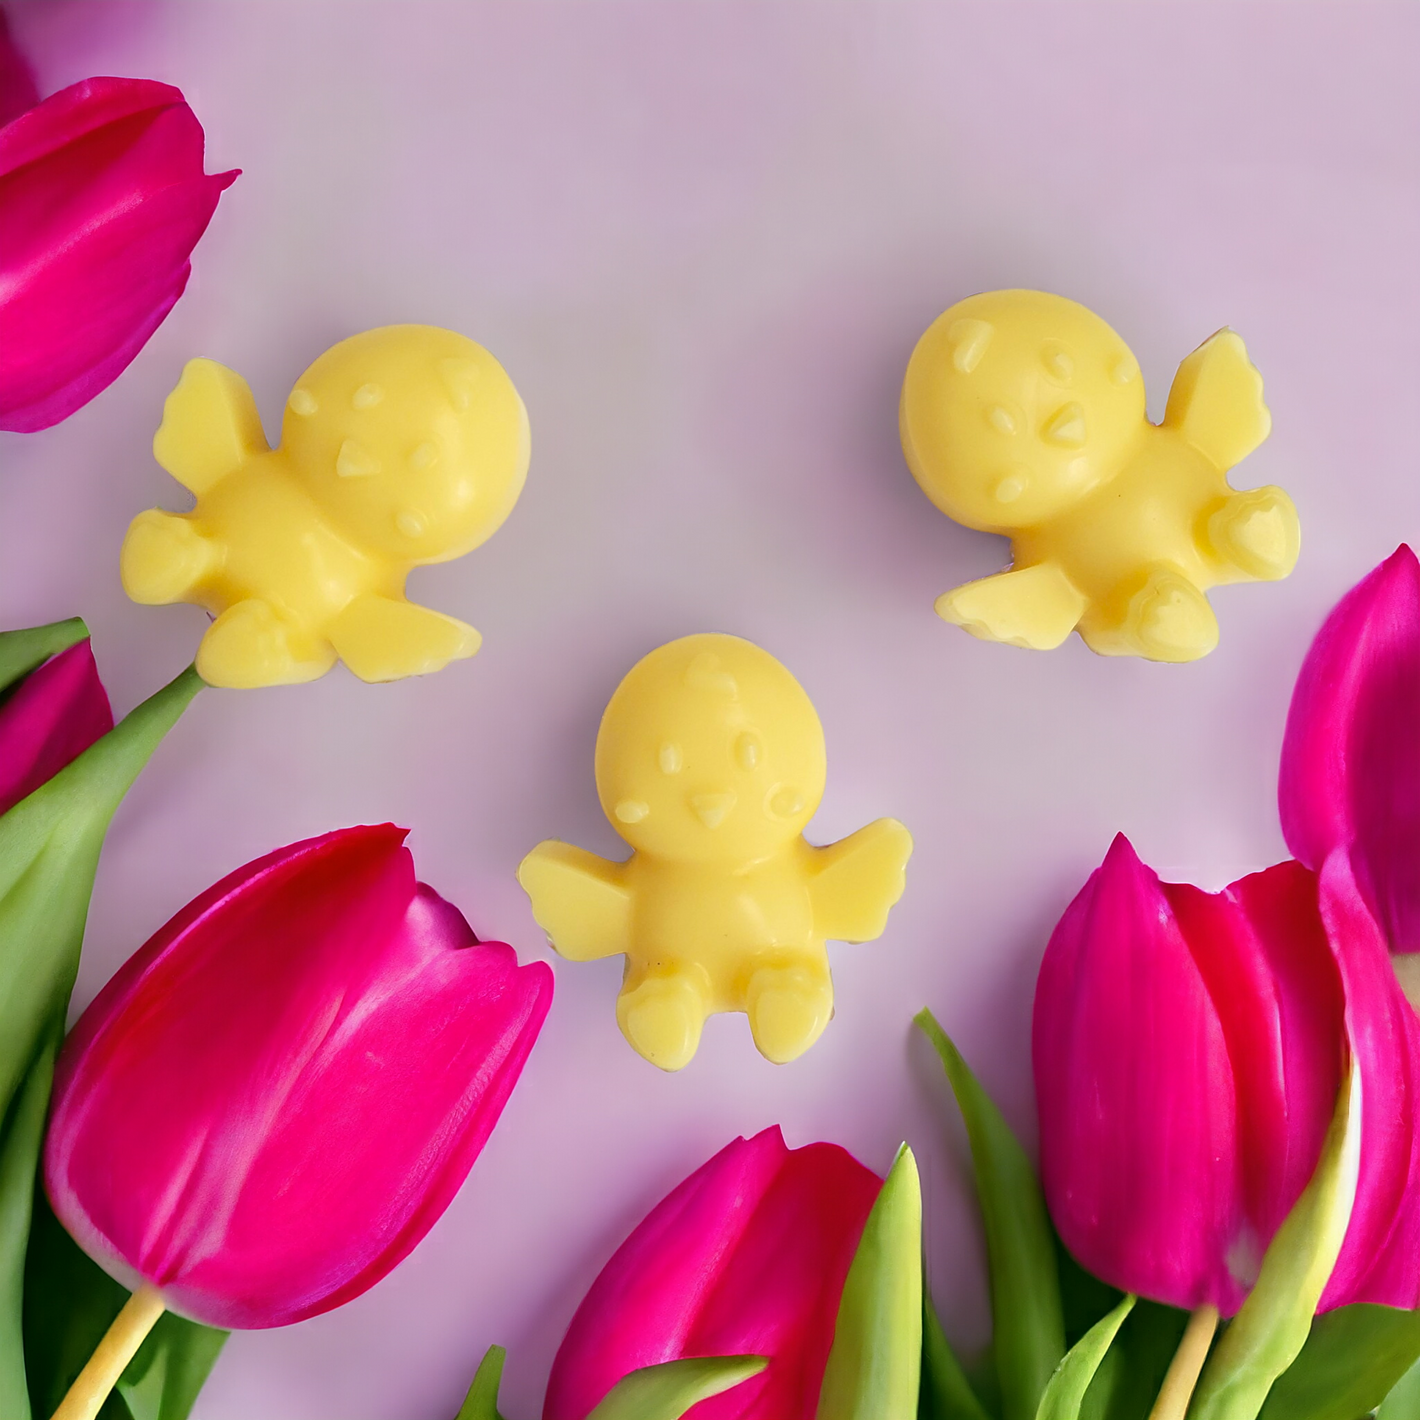 Three yellow baby chicks soy wax melts with pink tulips in the background.